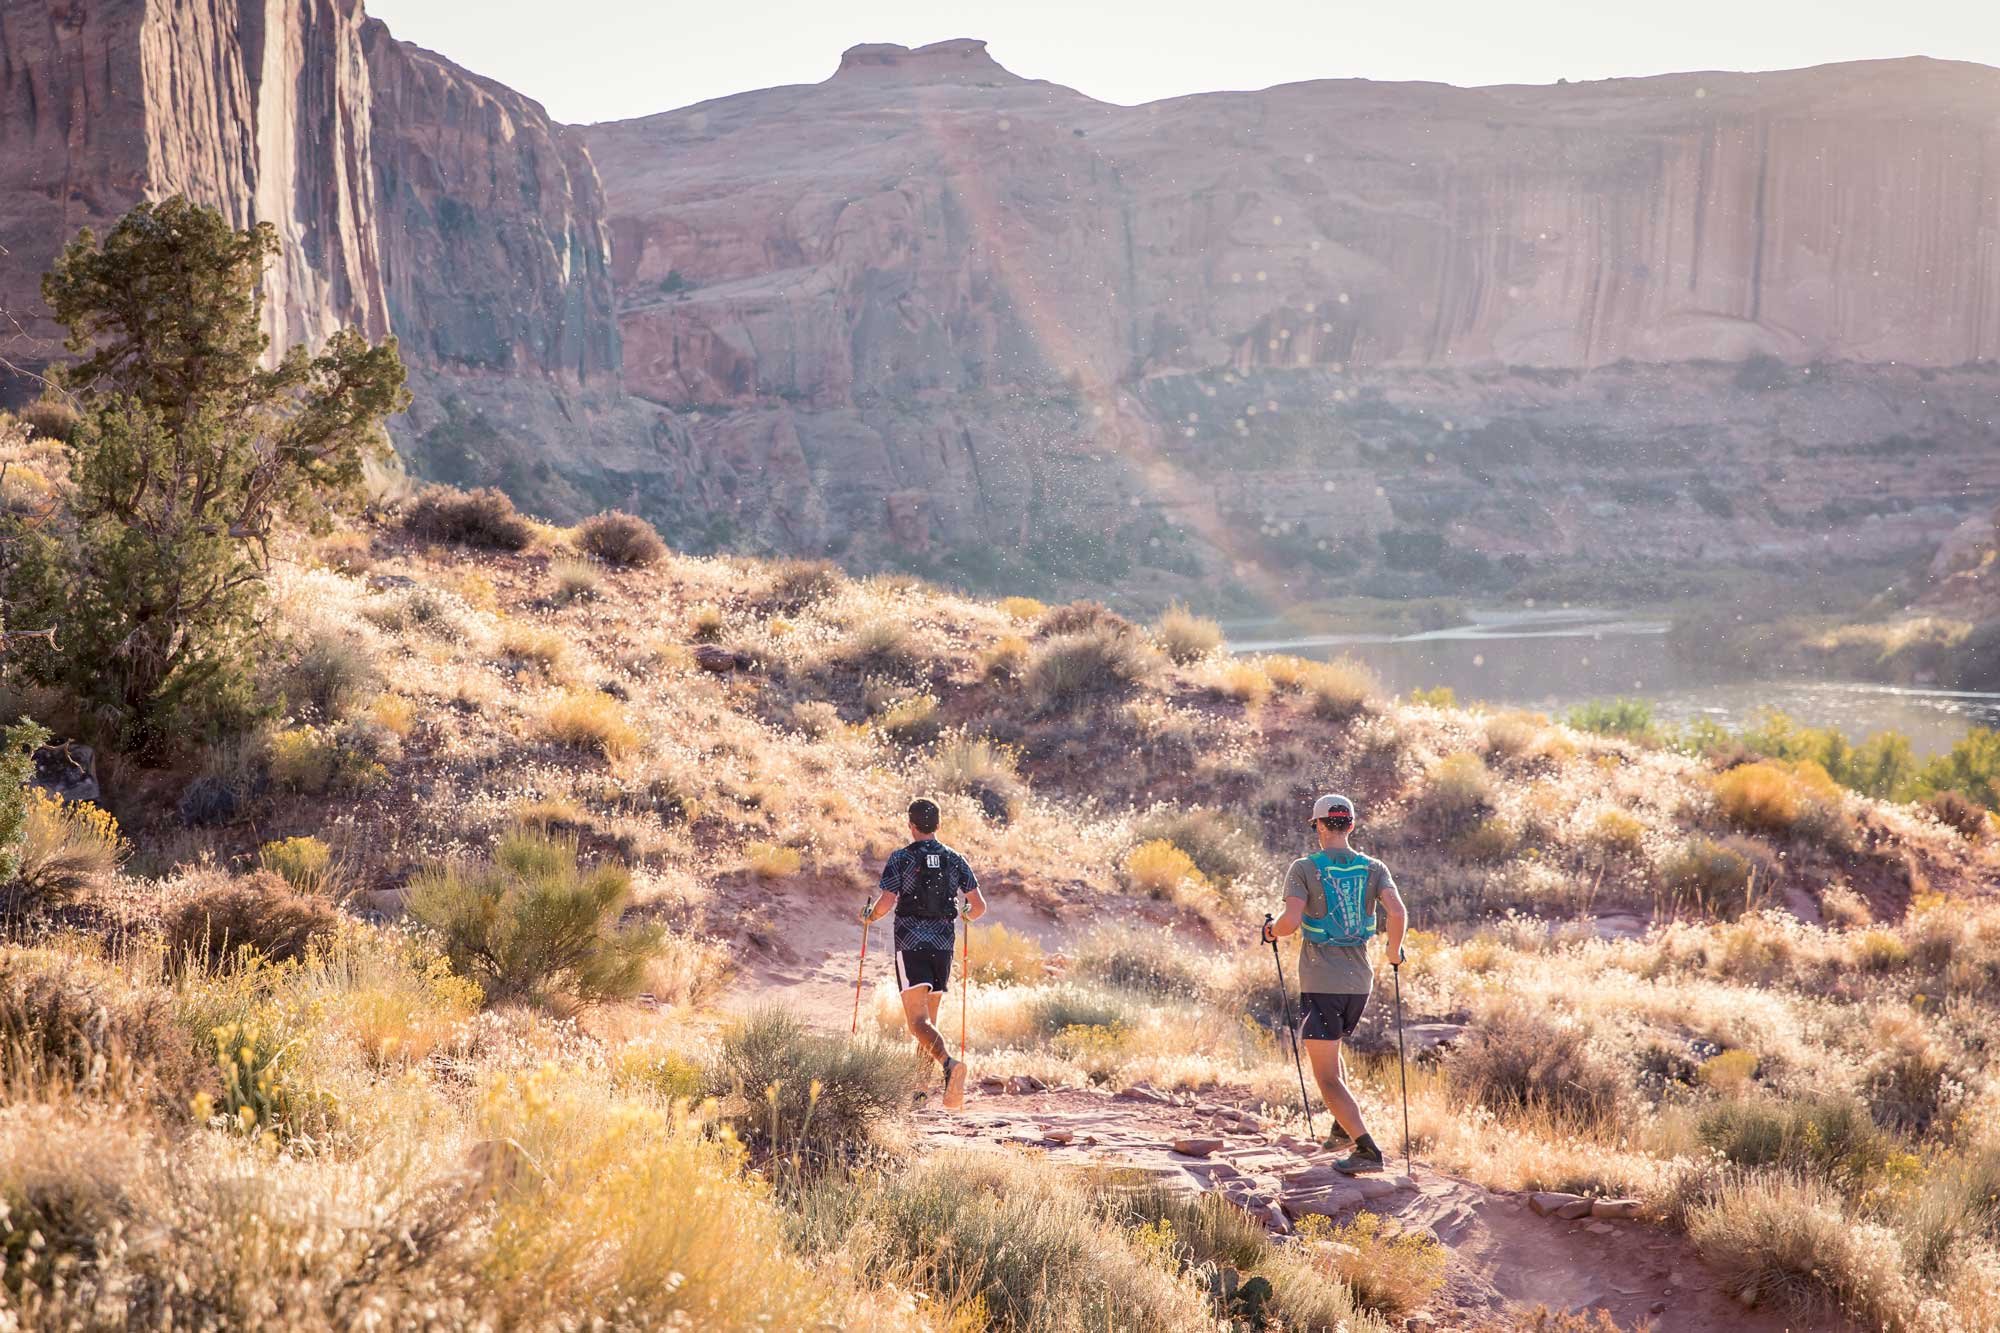  Two runners make their way through Porcupine Rim in Utah during golden hour 